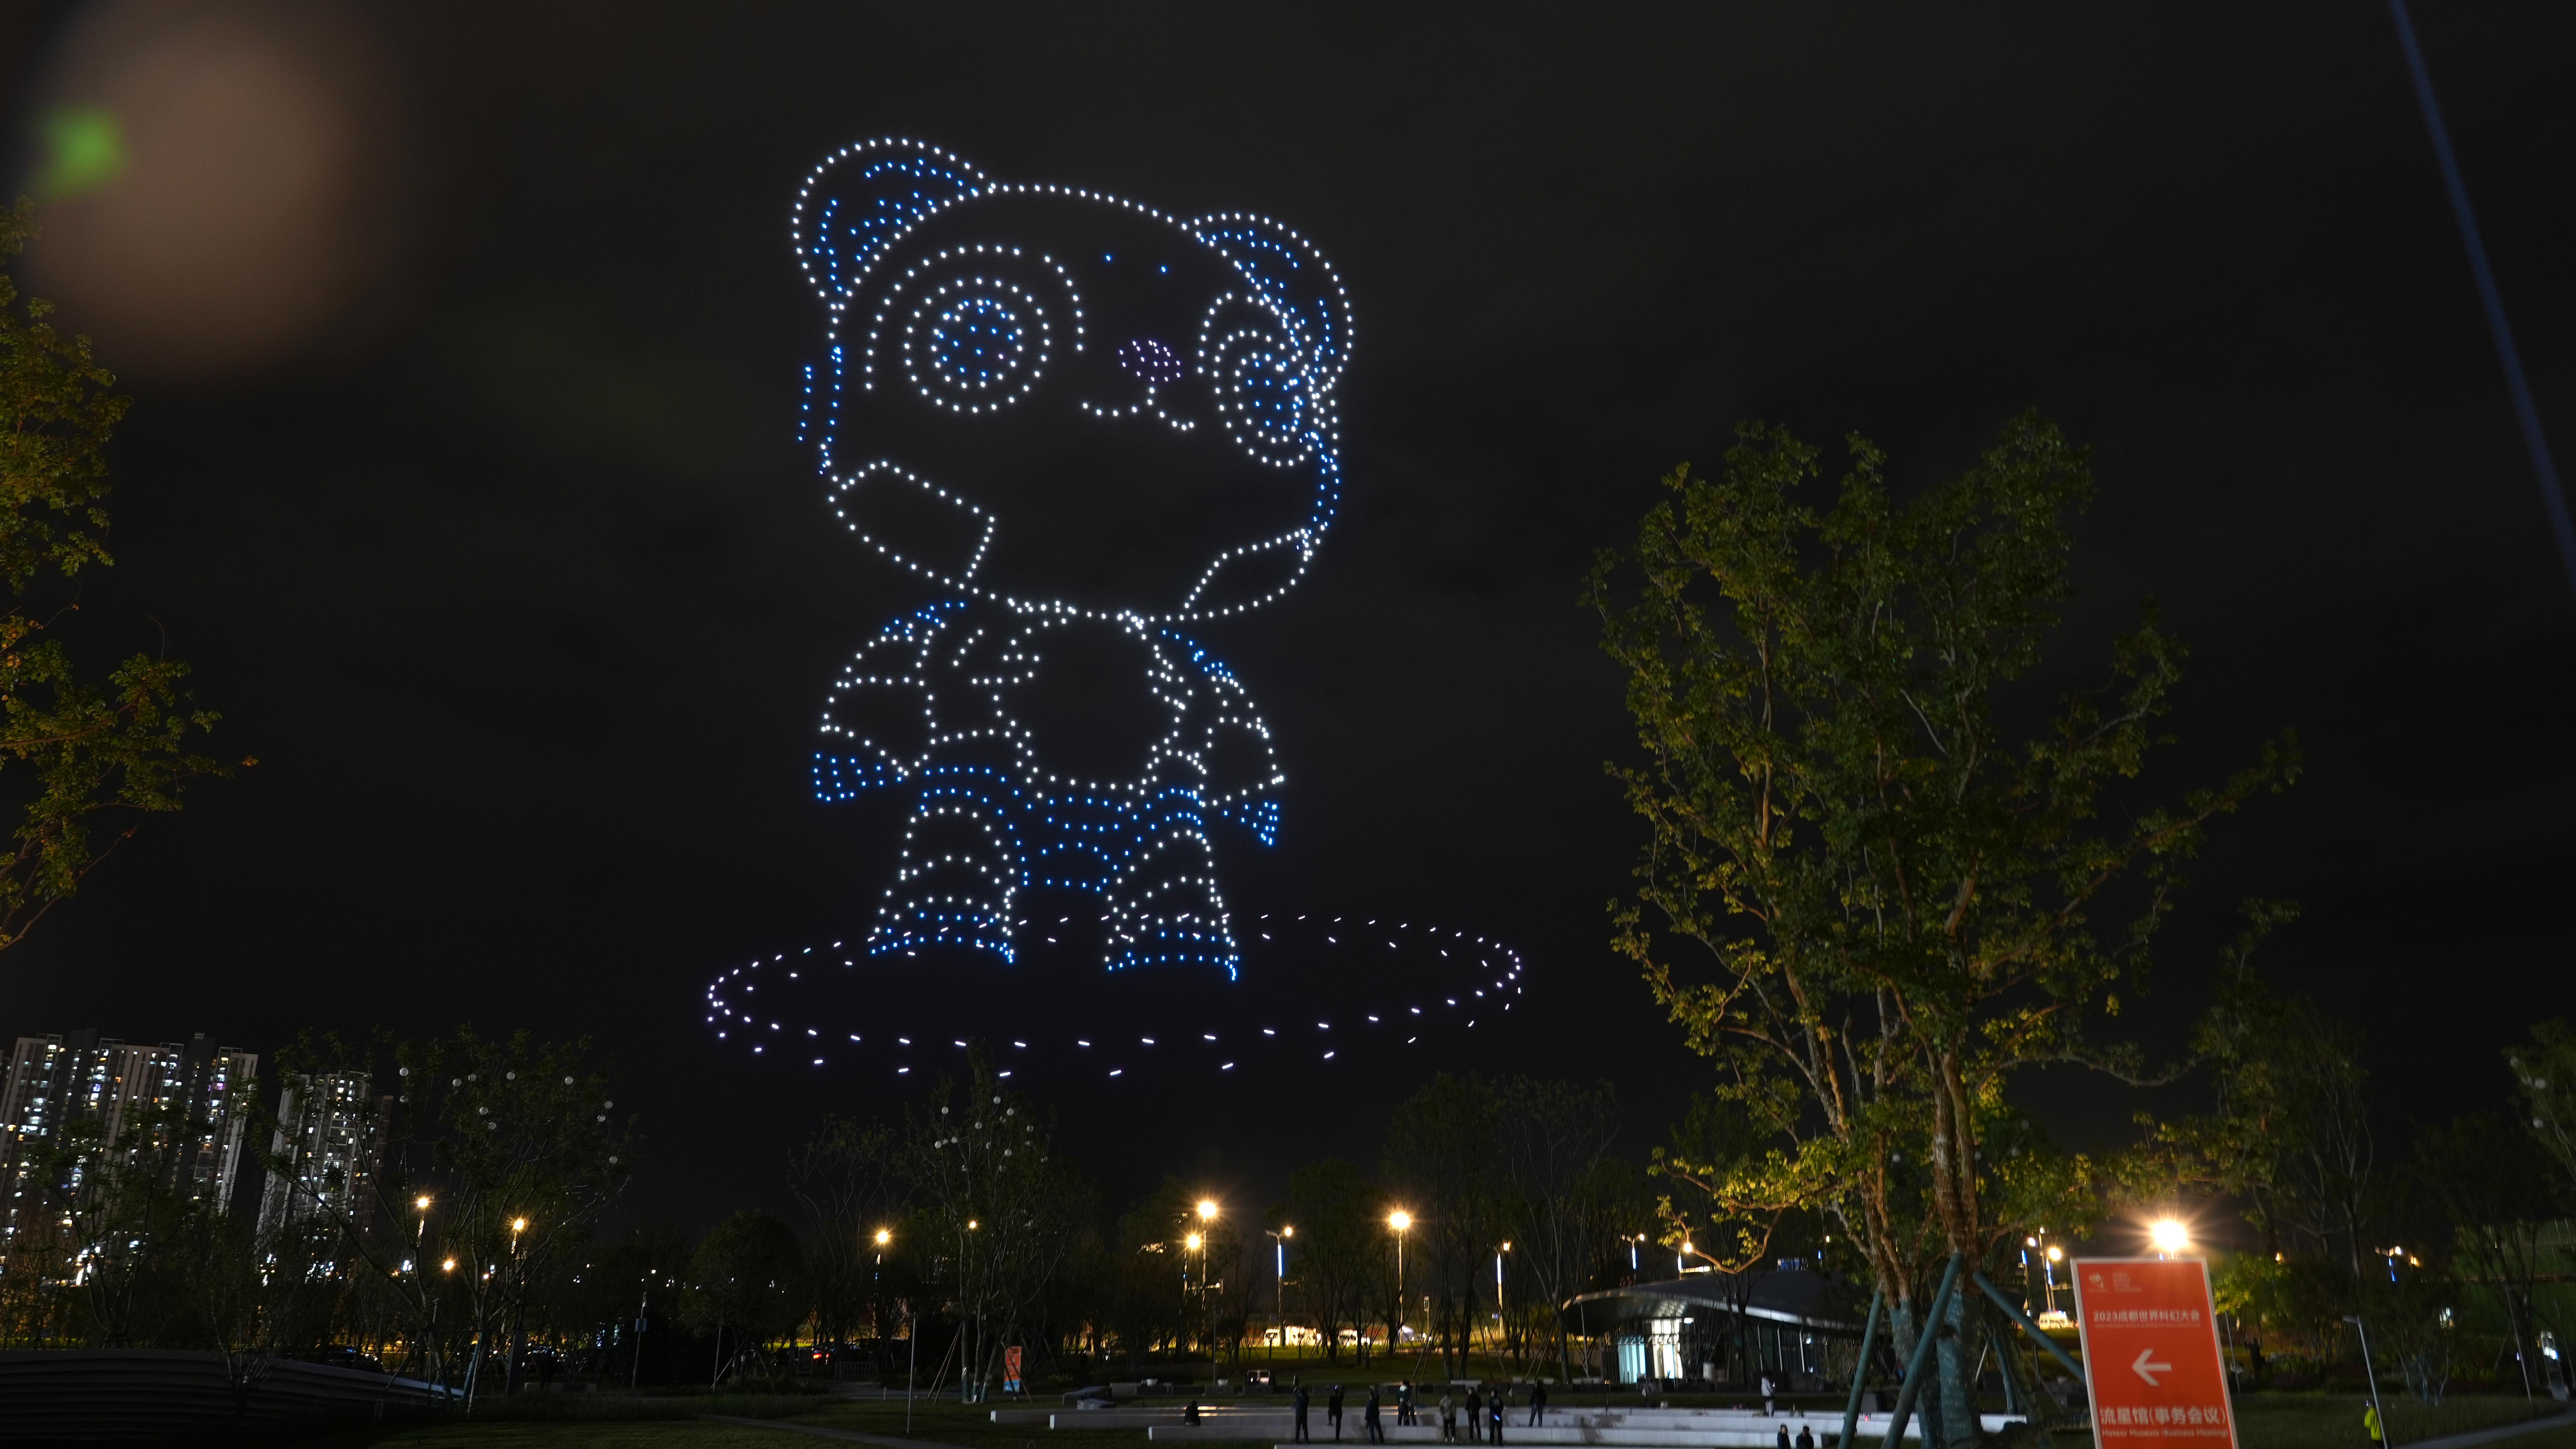 The mascot Kormo is formed in the air by drones with lights in Chengdu, Sichuan Province, China. /CGTN